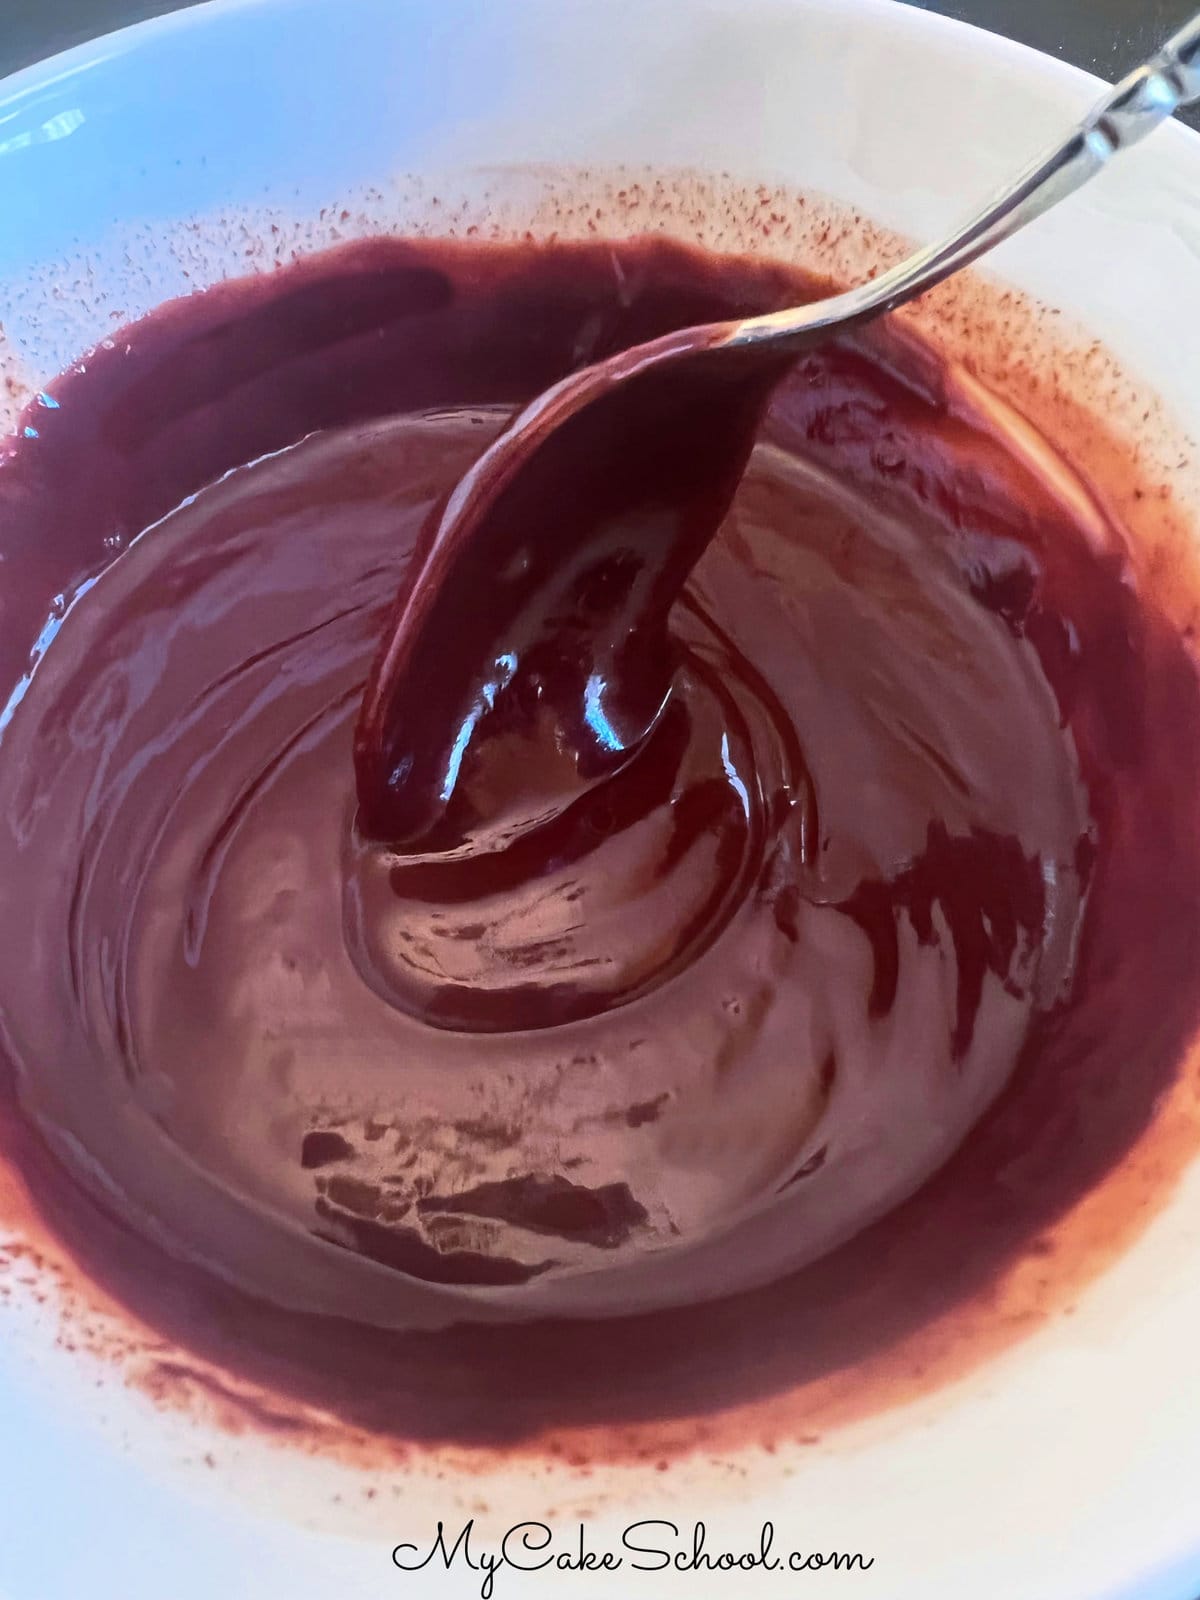 Spoon dipped in bowl of ganache